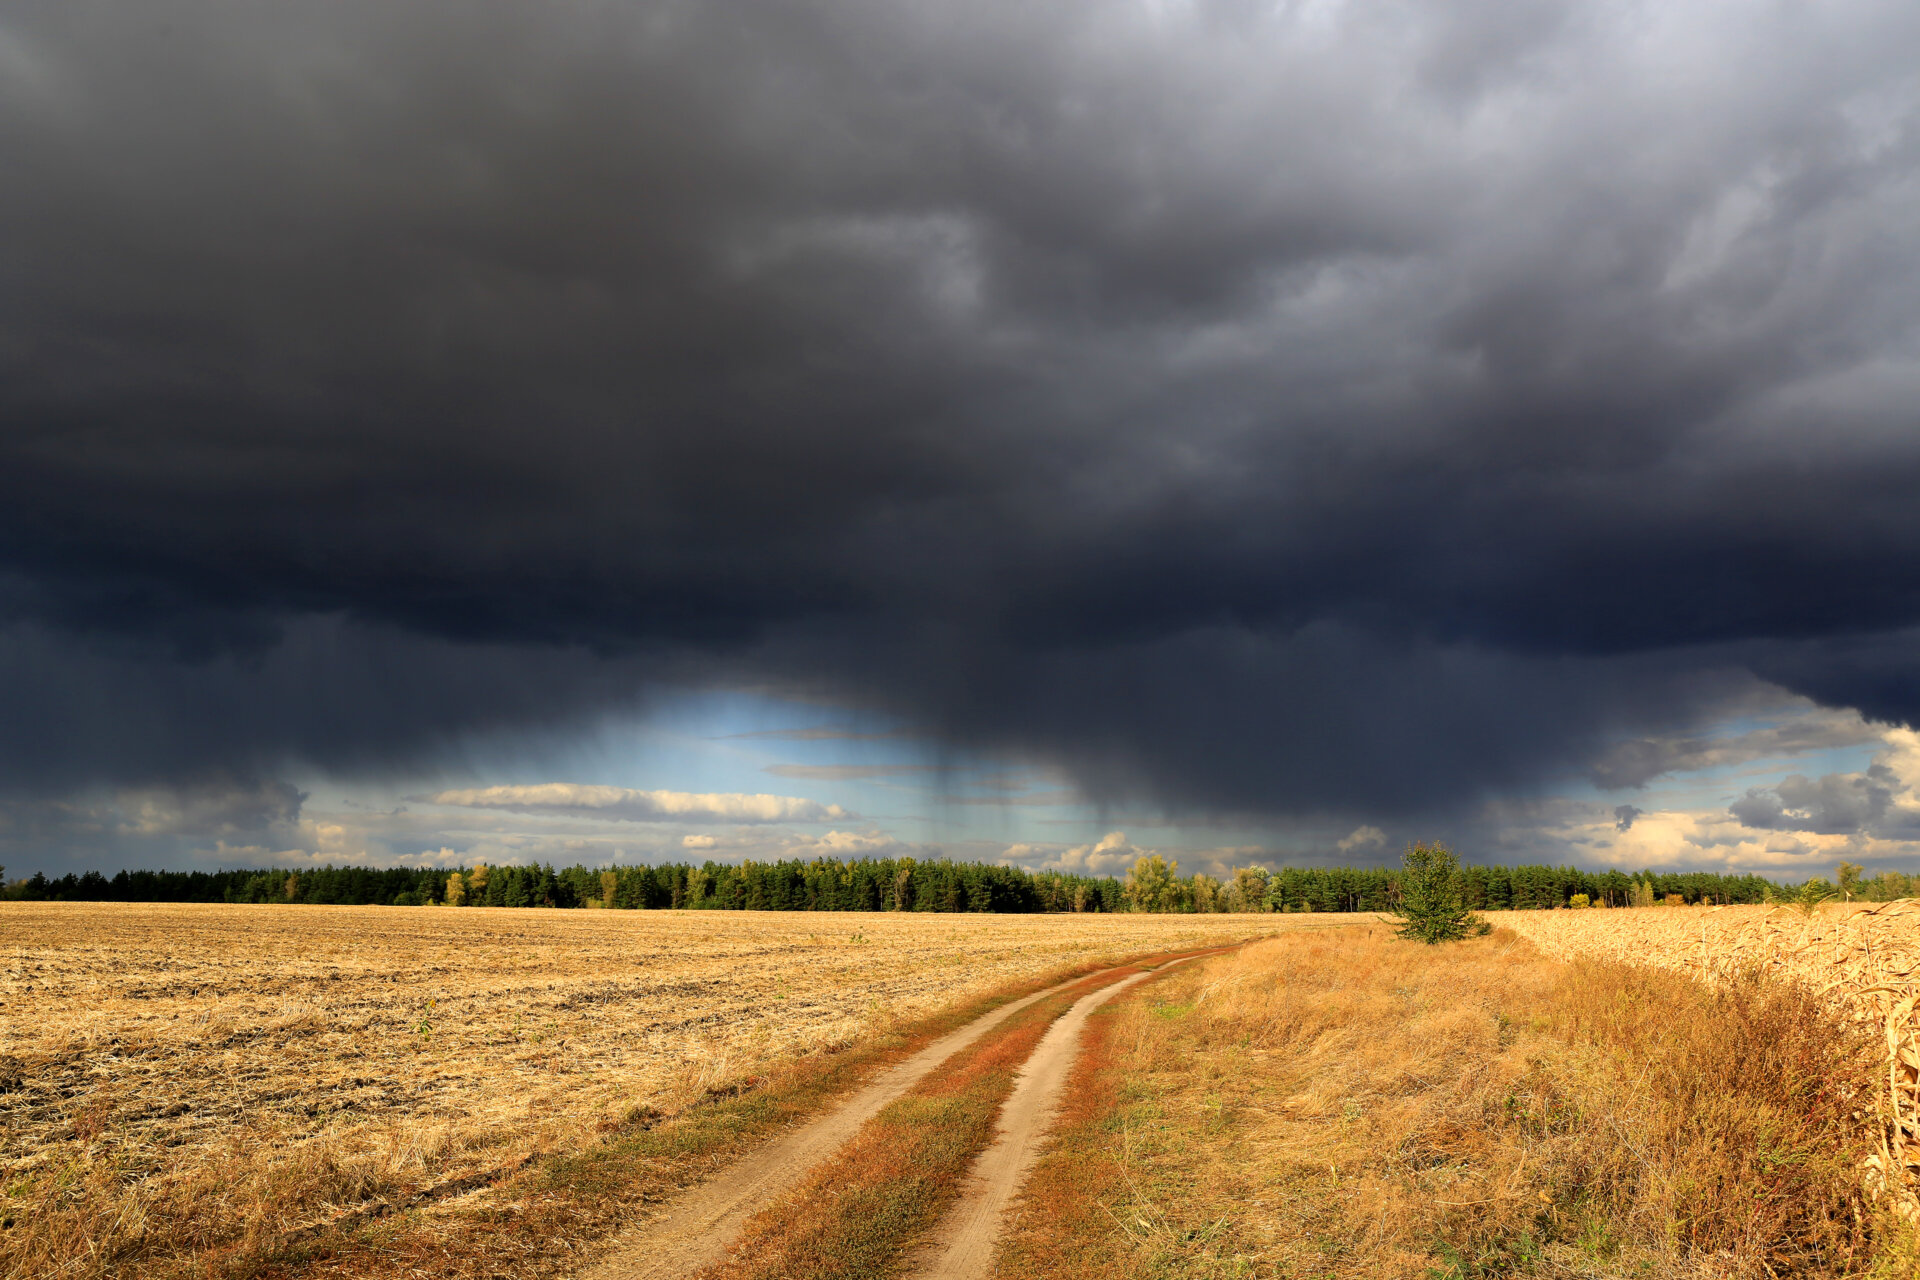 Heavy clouds over dirty road in steppe, Autumn day, landscape in Ukraine.